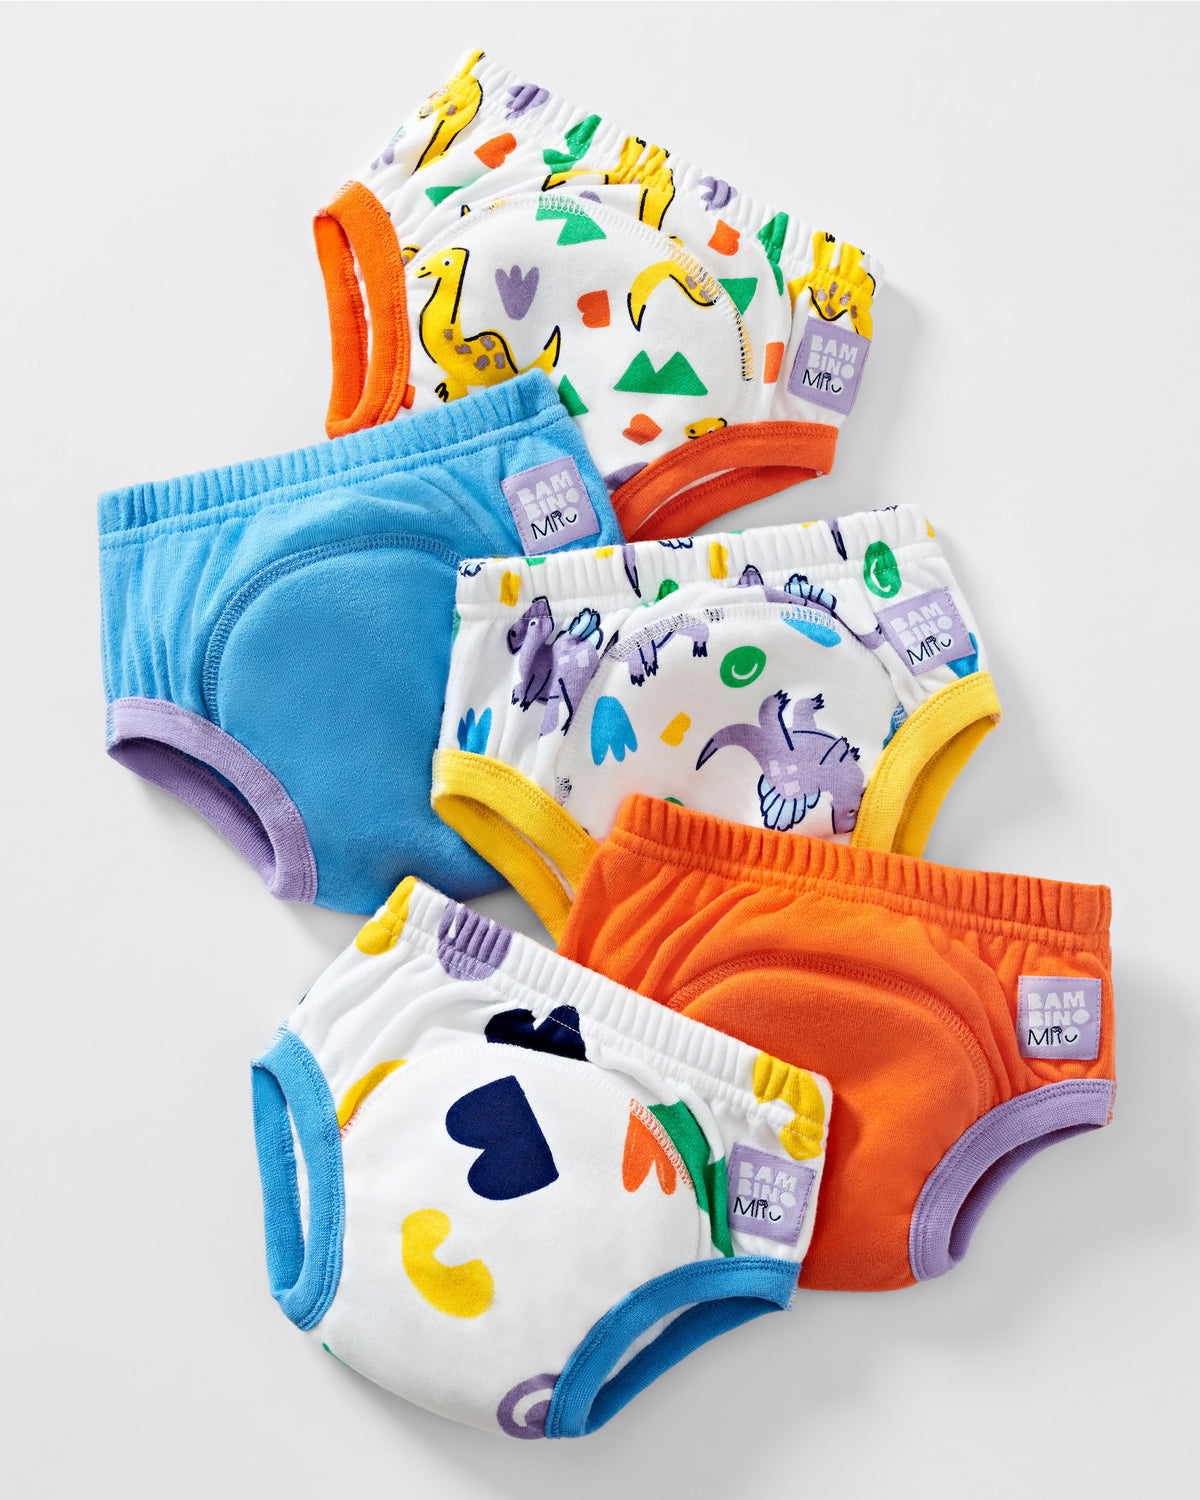 Bambino Mio - Training Pants - 18-24 Months, Shop Today. Get it Tomorrow!